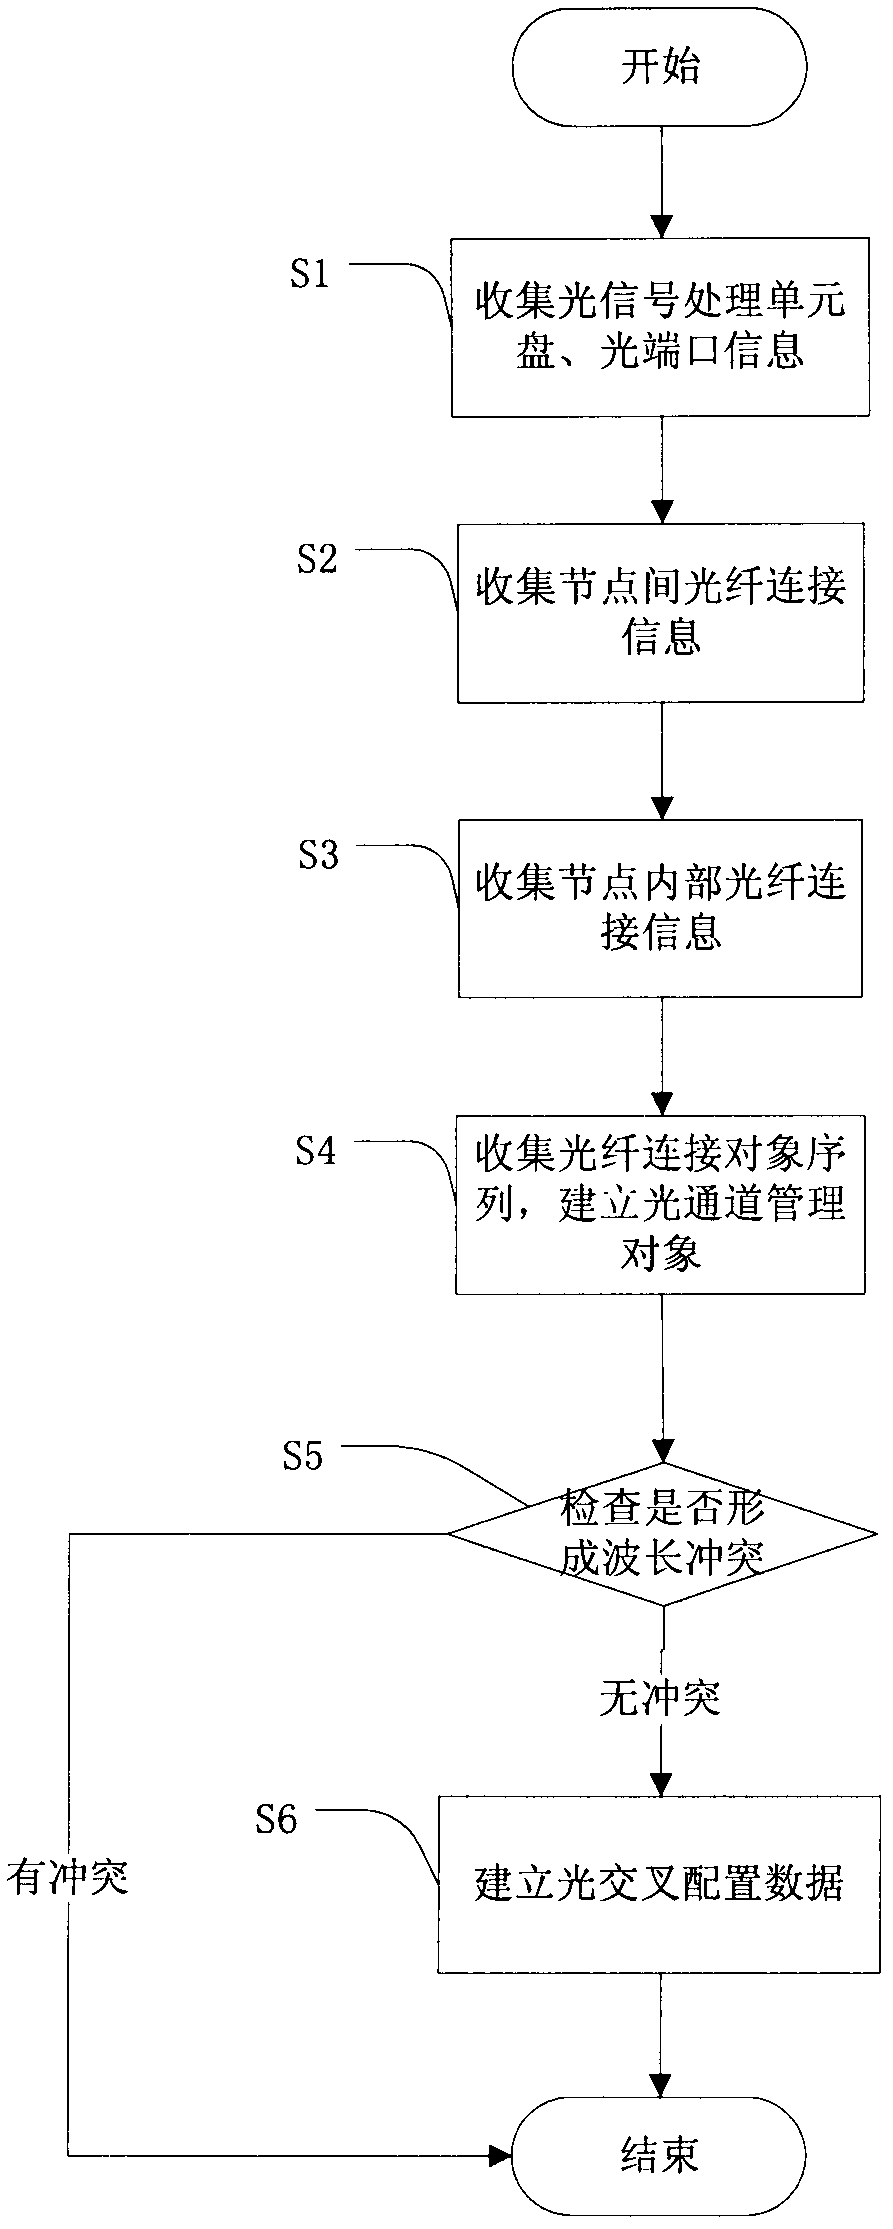 Method and device for peer-to-peer optical cross connection configuration